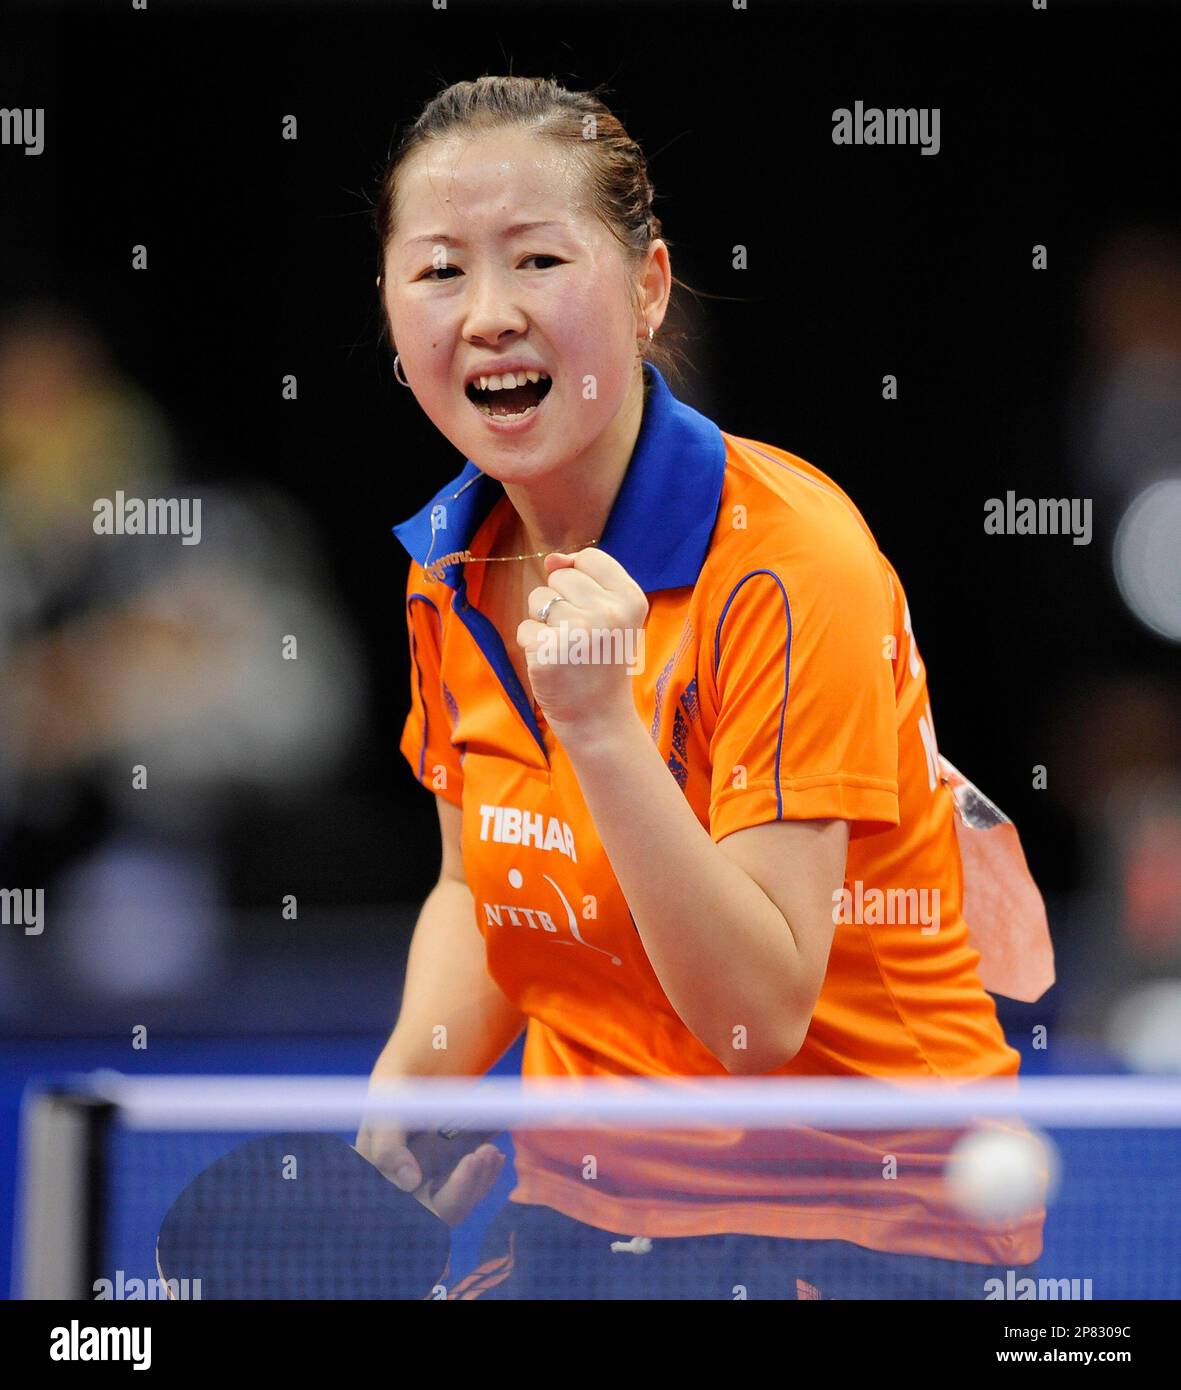 Table tennis player Li Jie from The Netherlands reacts on winning a point  in her Women's team final match against Poland's Natalia Partyka during the  team competition of the Table Tennis European